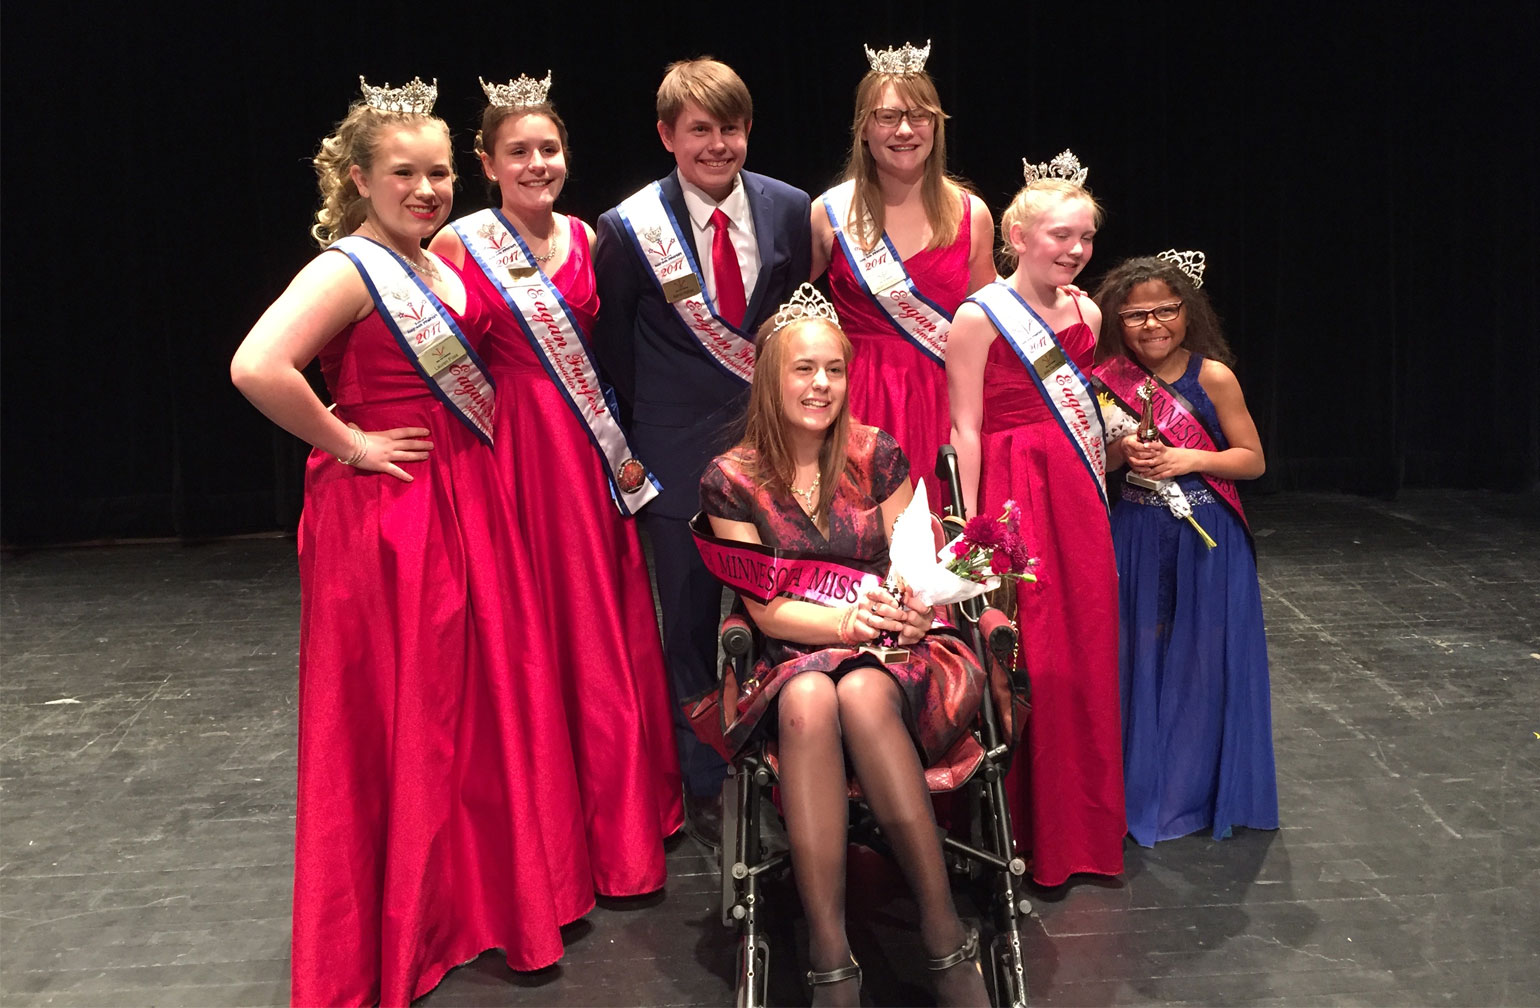 Katie Allee at the Miss Amazing Pageant